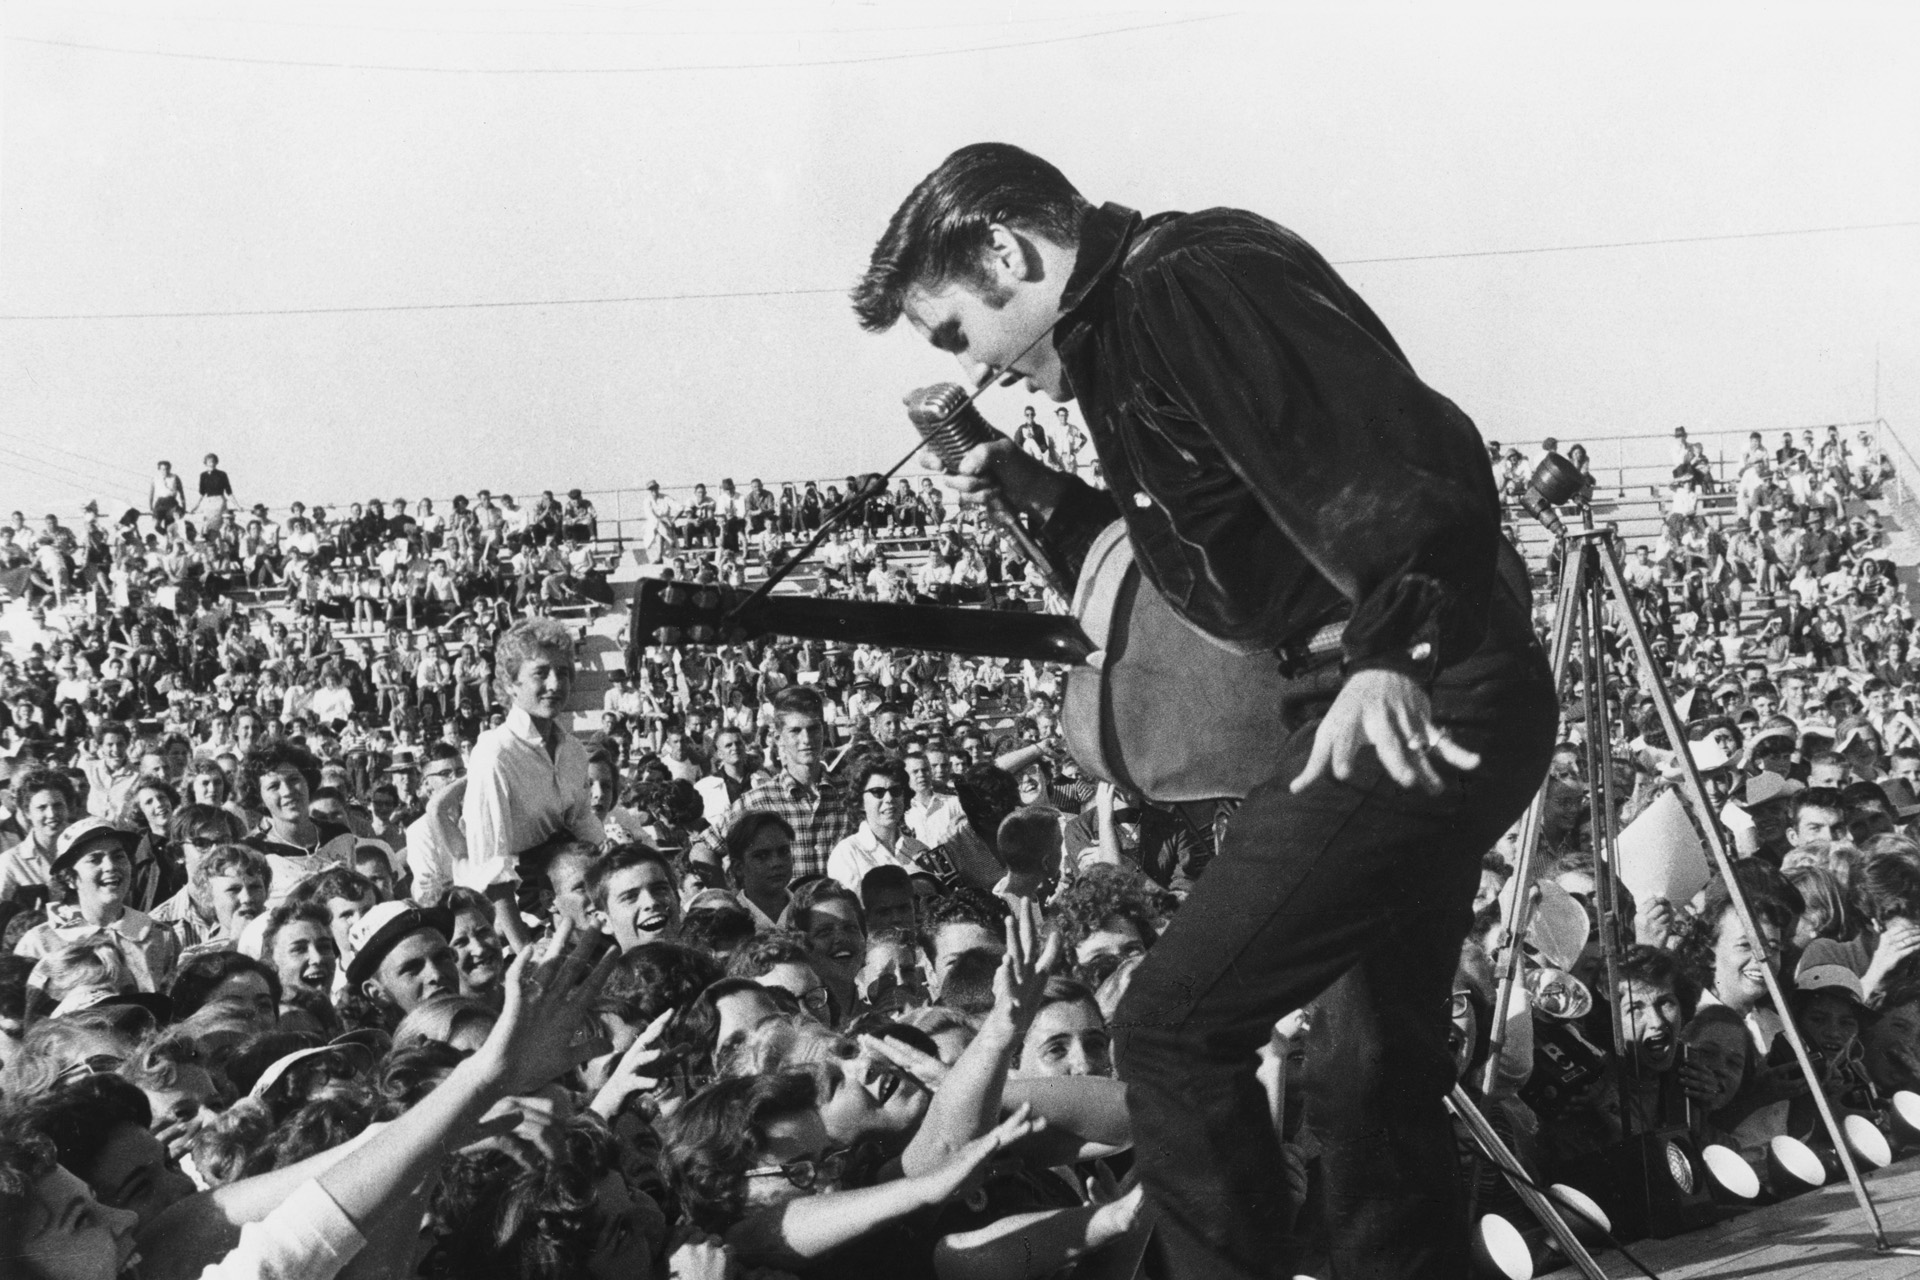 An Elvis Presley Hologram Concert Experience Is Coming To London